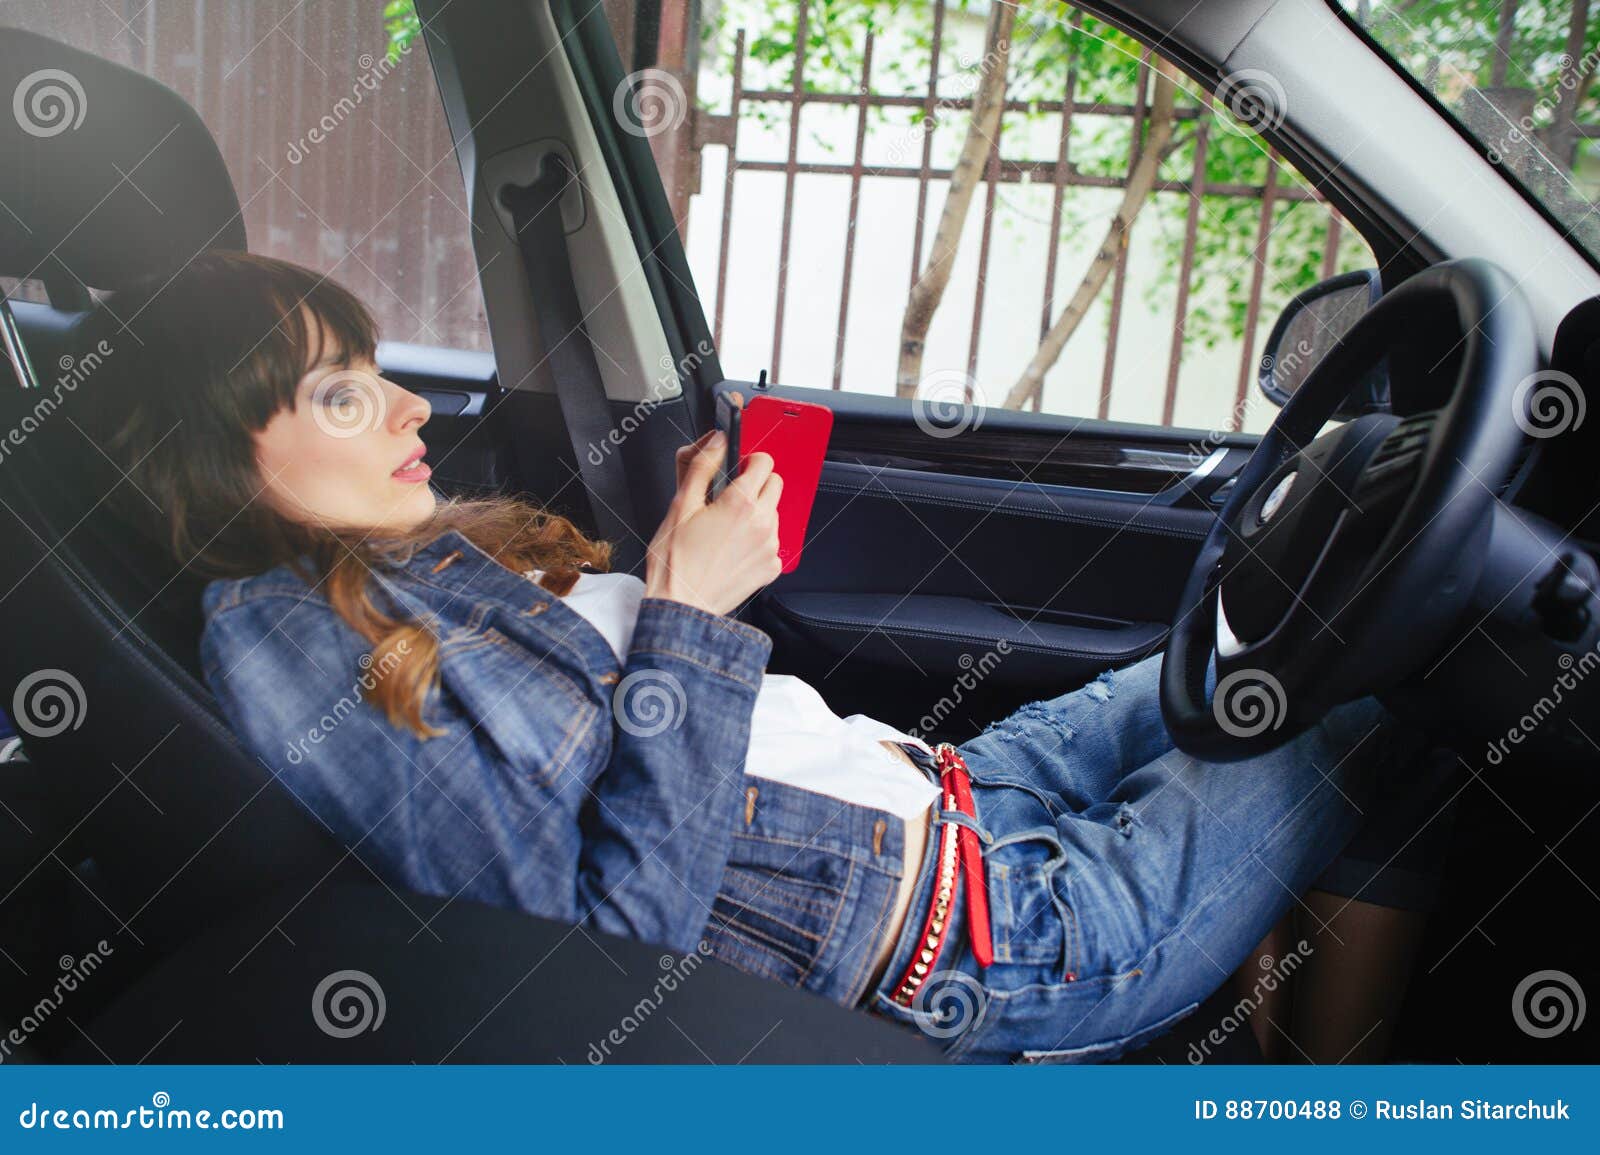 Beautiful Woman on the Phone in the Car Stock Photo - Image of ...